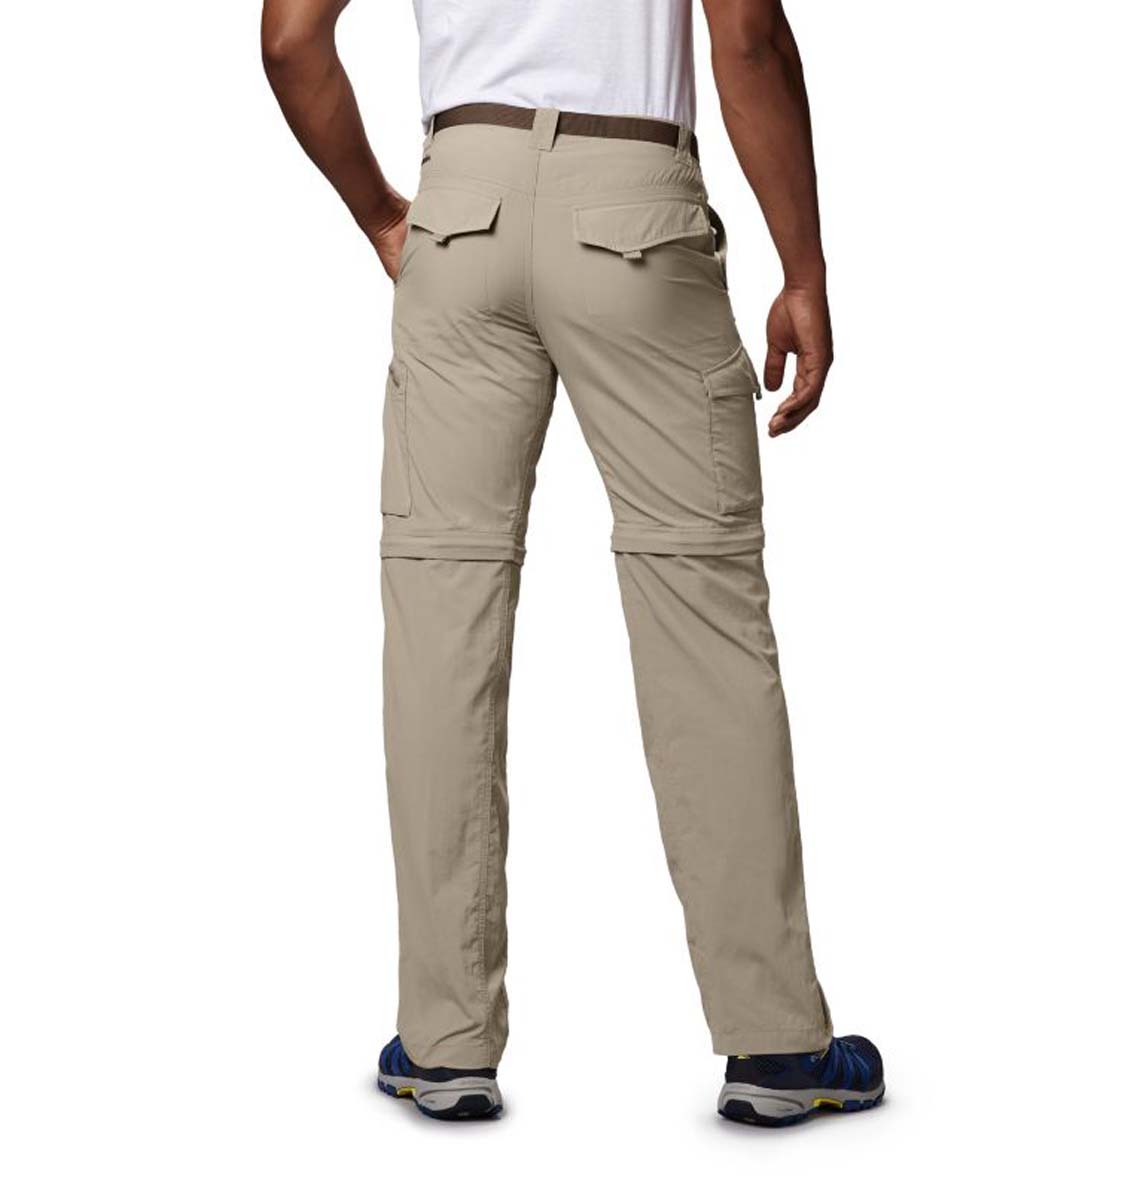 https://borregooutfitters.com/wp-content/uploads/Columbia-Sportswear-Silver-Ridge-Convertible-Pant-30in_1441671_160Fossil-Borrego-Outfitters-scaled.jpg